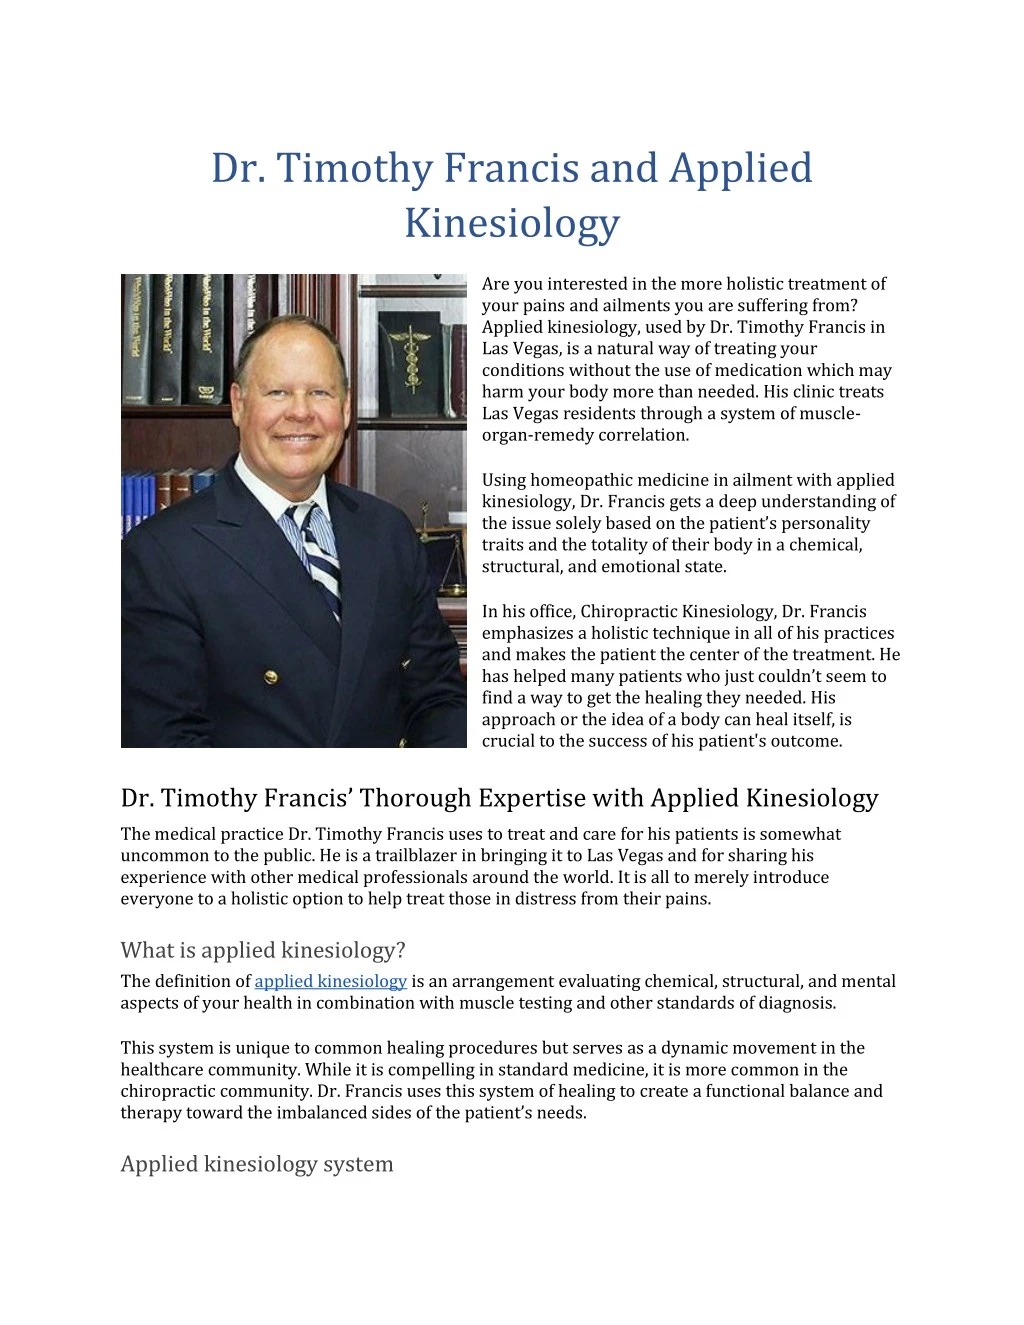 dr timothy francis and applied kinesiology